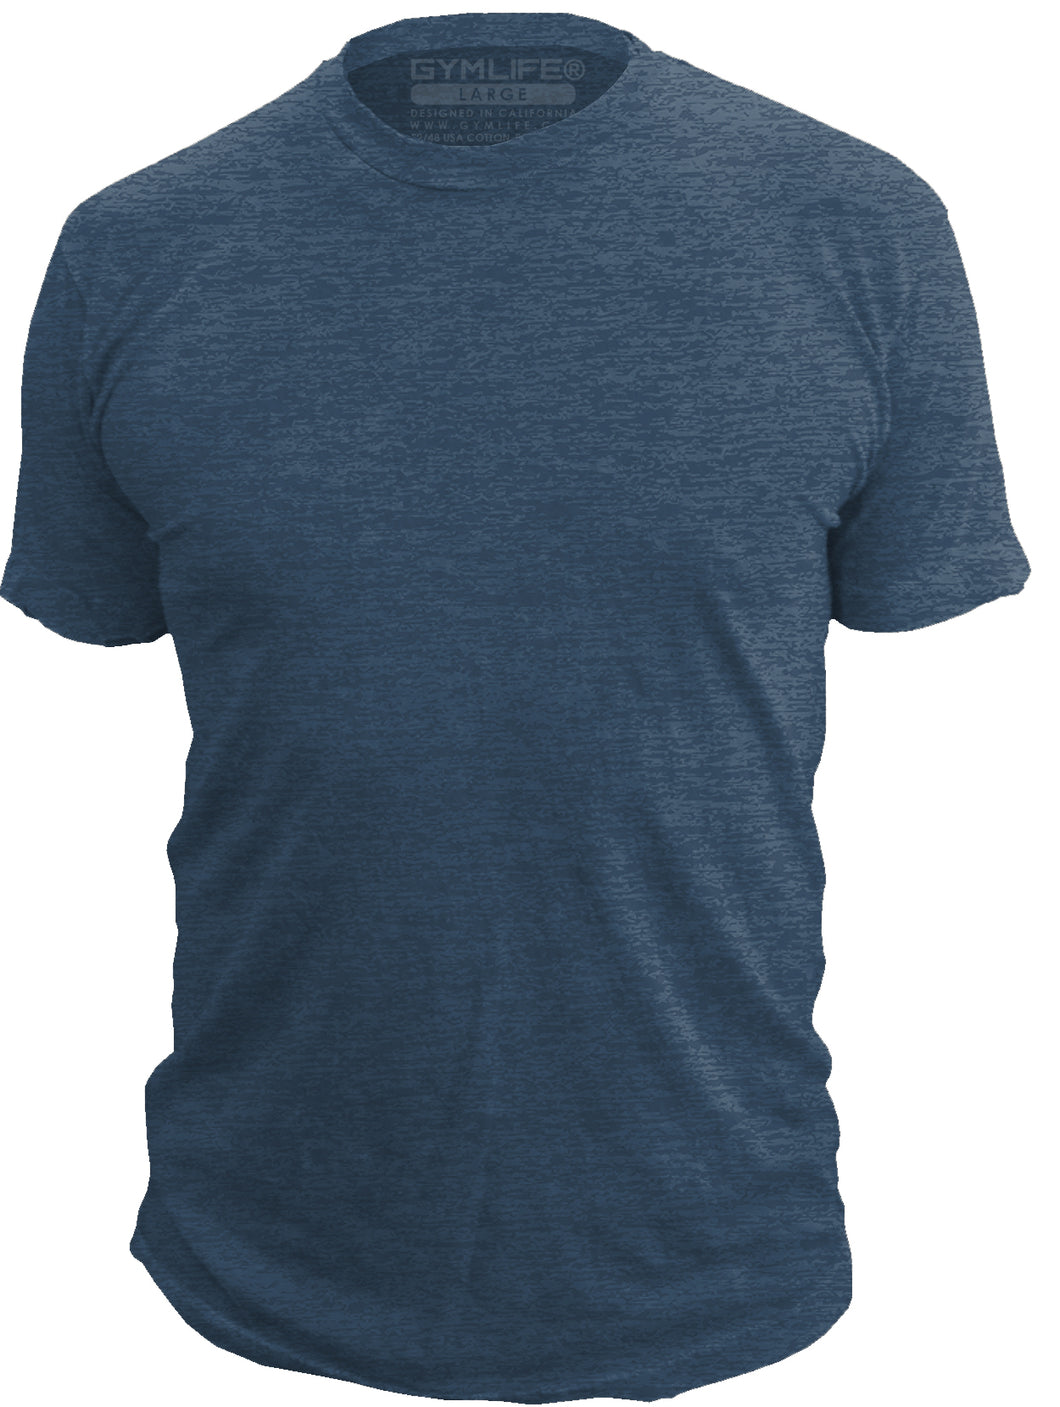 GYM LIFE - BLANK - Mens Athletic 52/48 Premium T-Shirt, Made of USA, Navy Blue Heather